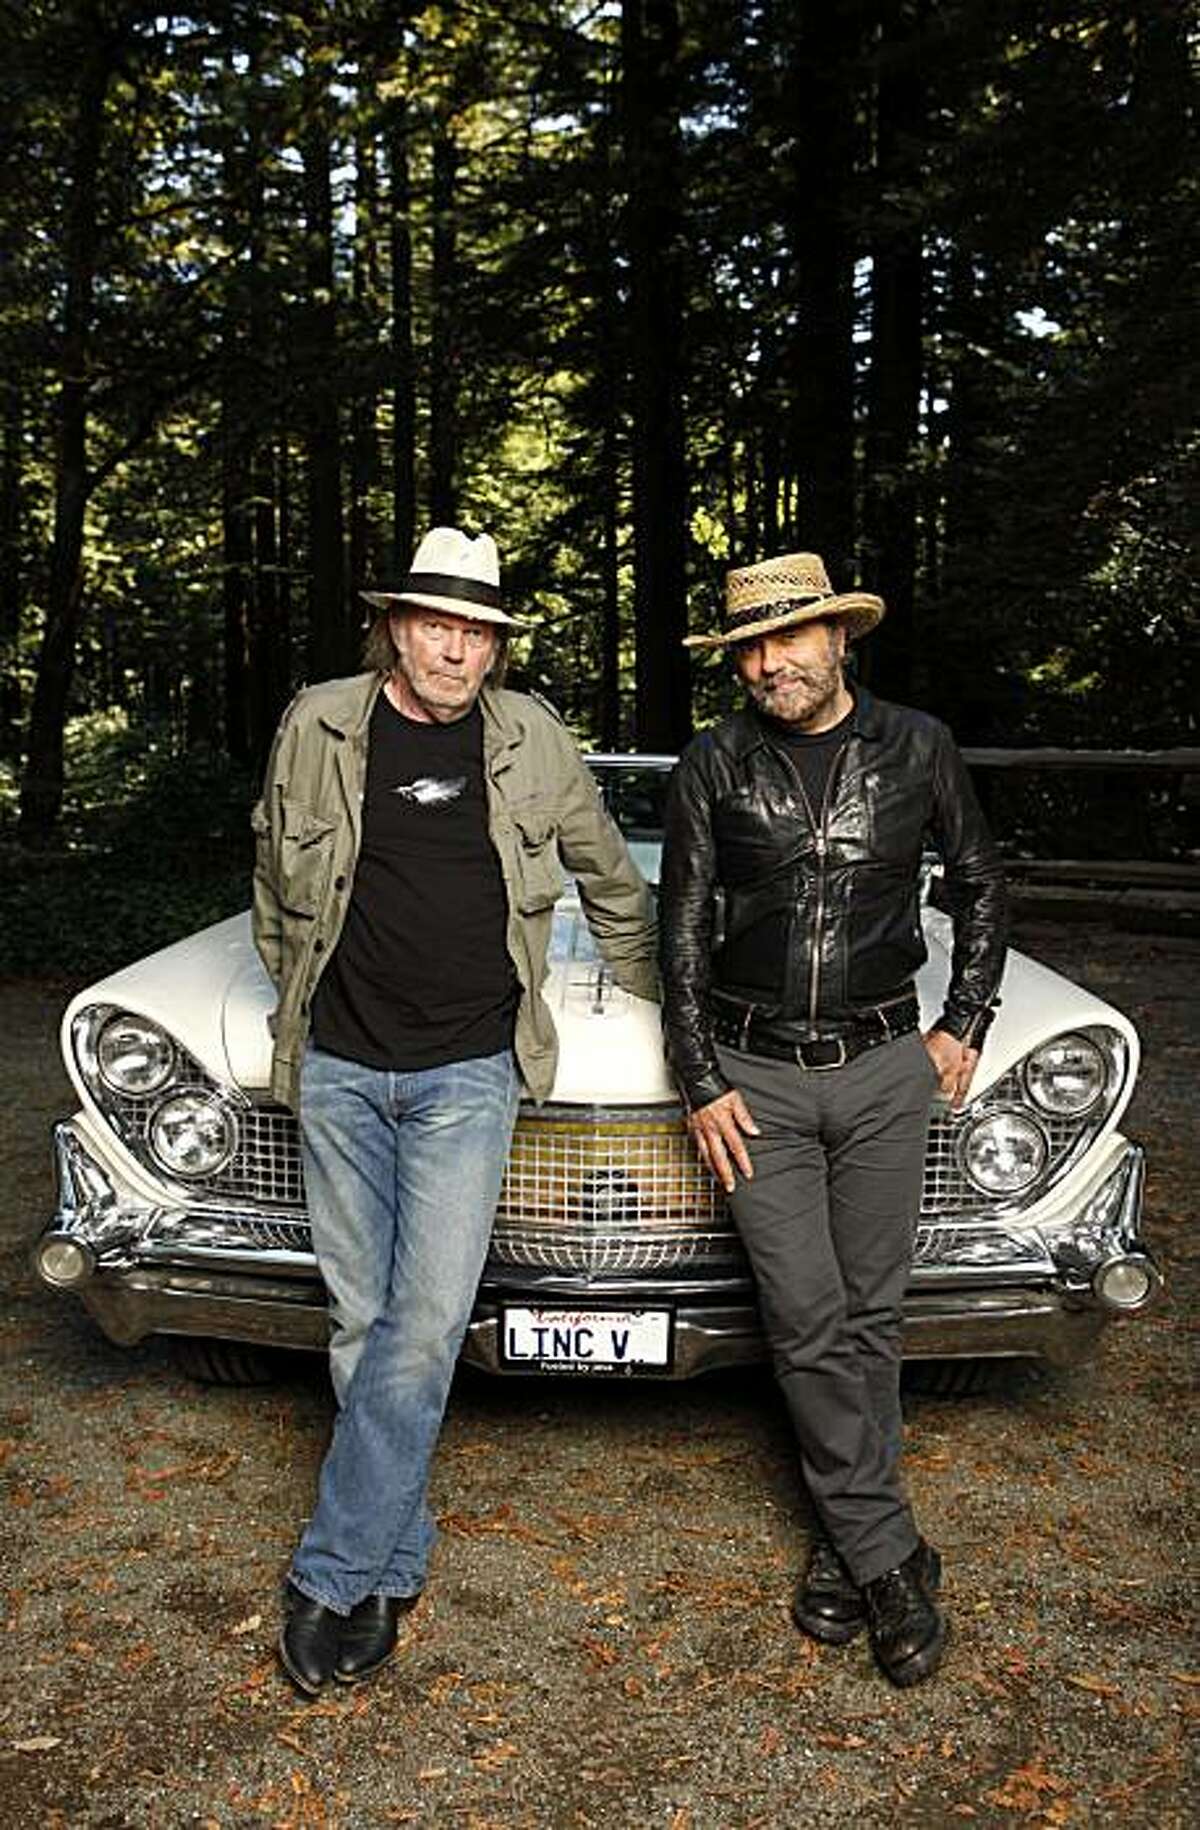 In this Sept. 10, 2010 file photo, musicians Neil Young, left, and Daniel Lanois are photographed beside Young's 1959 hybrid Lincoln Continental in Woodside, Calif. A fire at a San Francisco Bay area warehouse that stored memorabilia belonging toNeil Young started the vintage car the singer had converted into a hybrid vehicle. Belmont-San Carlos Fire Marshal Jim Palisi told the San Mateo County Times the Nov. 9 fire began in Young's 1959 Lincoln Continental and then spread to the nearby warehouse. Young had converted the car to run on electric batteries and a biodiesel-powered generator as part of the LincVolt project.